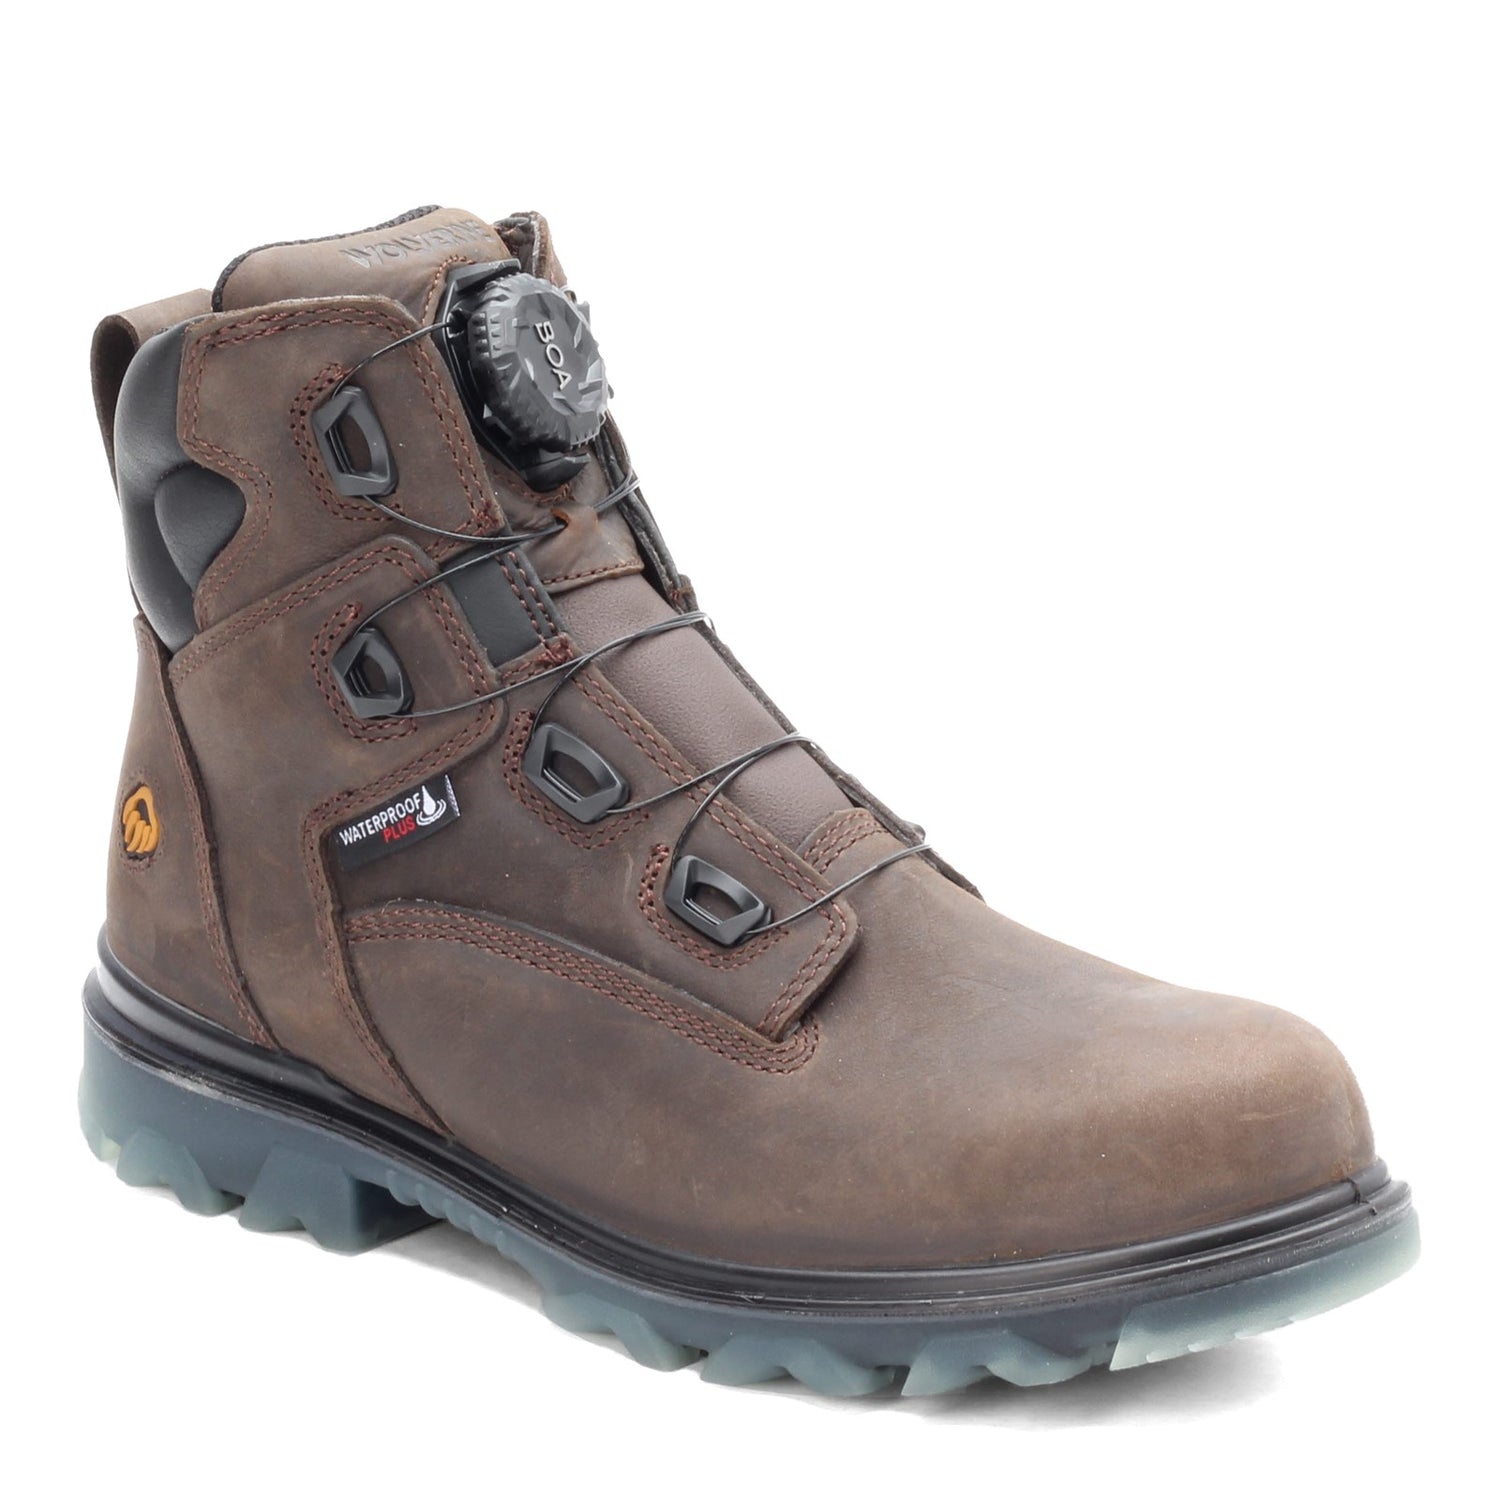 Peltz Shoes  Men's Wolverine Boots I-90 EPX Work Boot Coffee Bean W191063